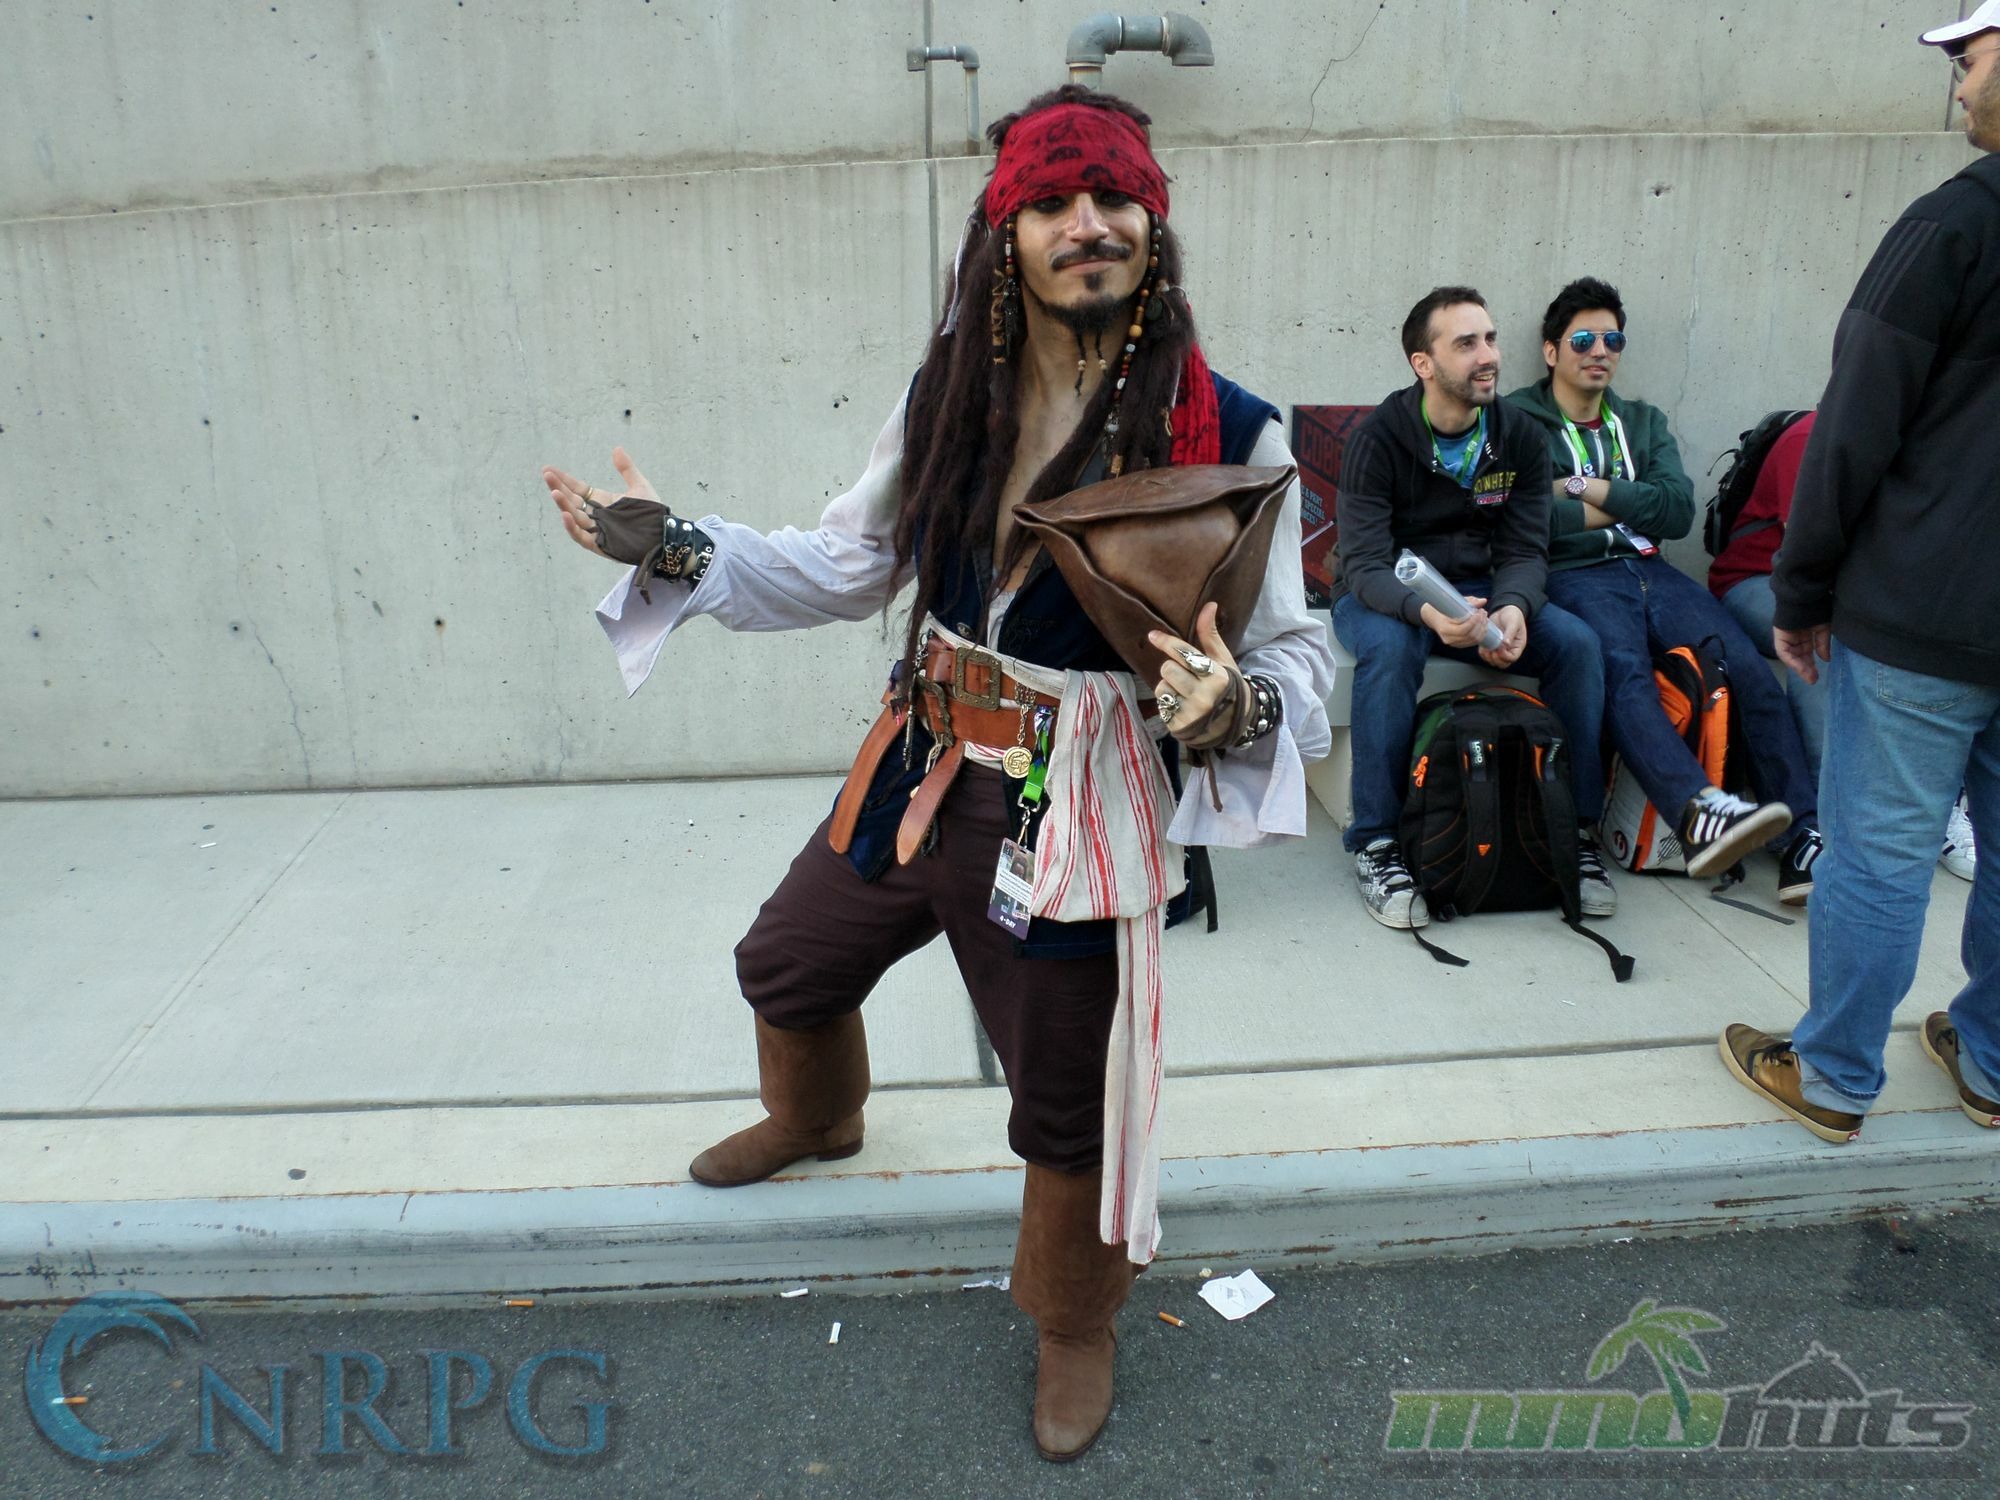 NYCC 2015 Day 4 Cosplay Jack Sparrow